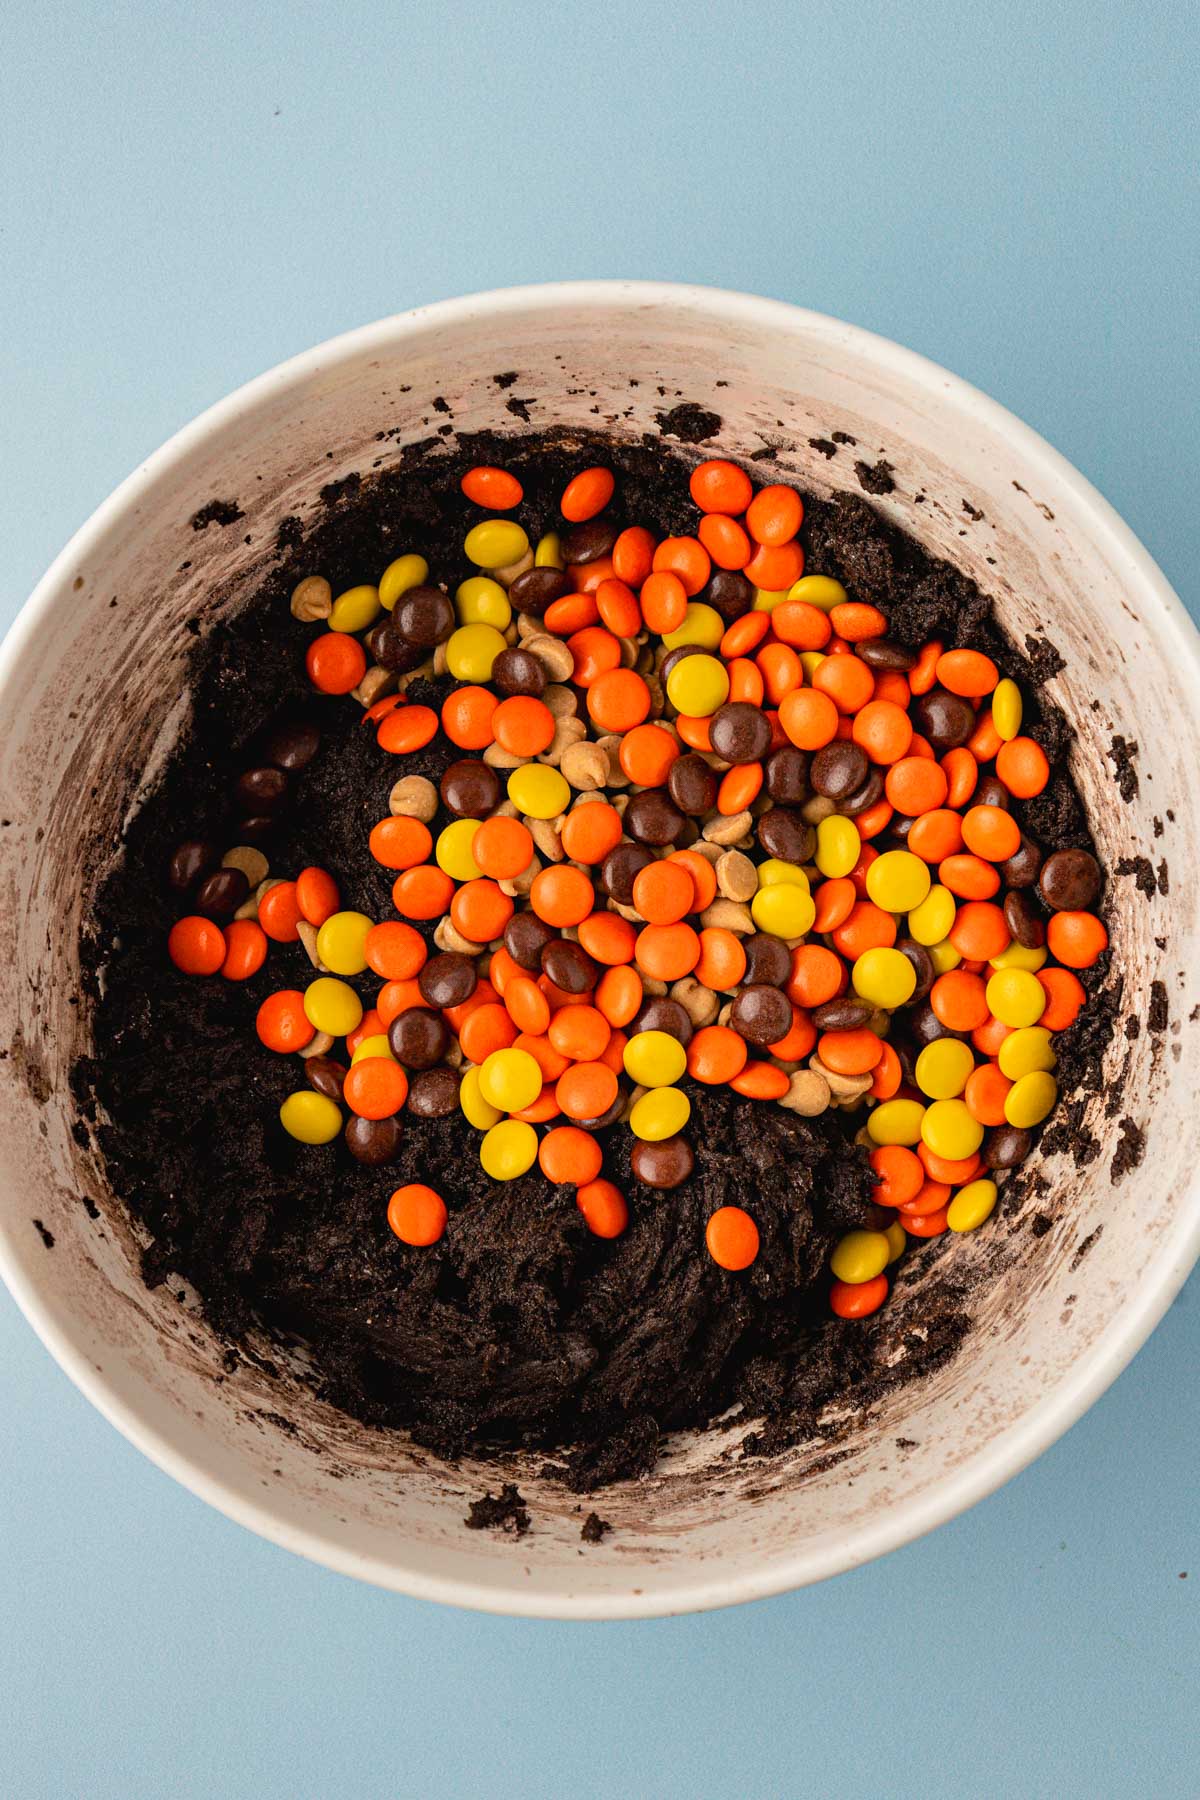 Reese's Pieces and peanut butter chips being added to chocolate cookie dough.